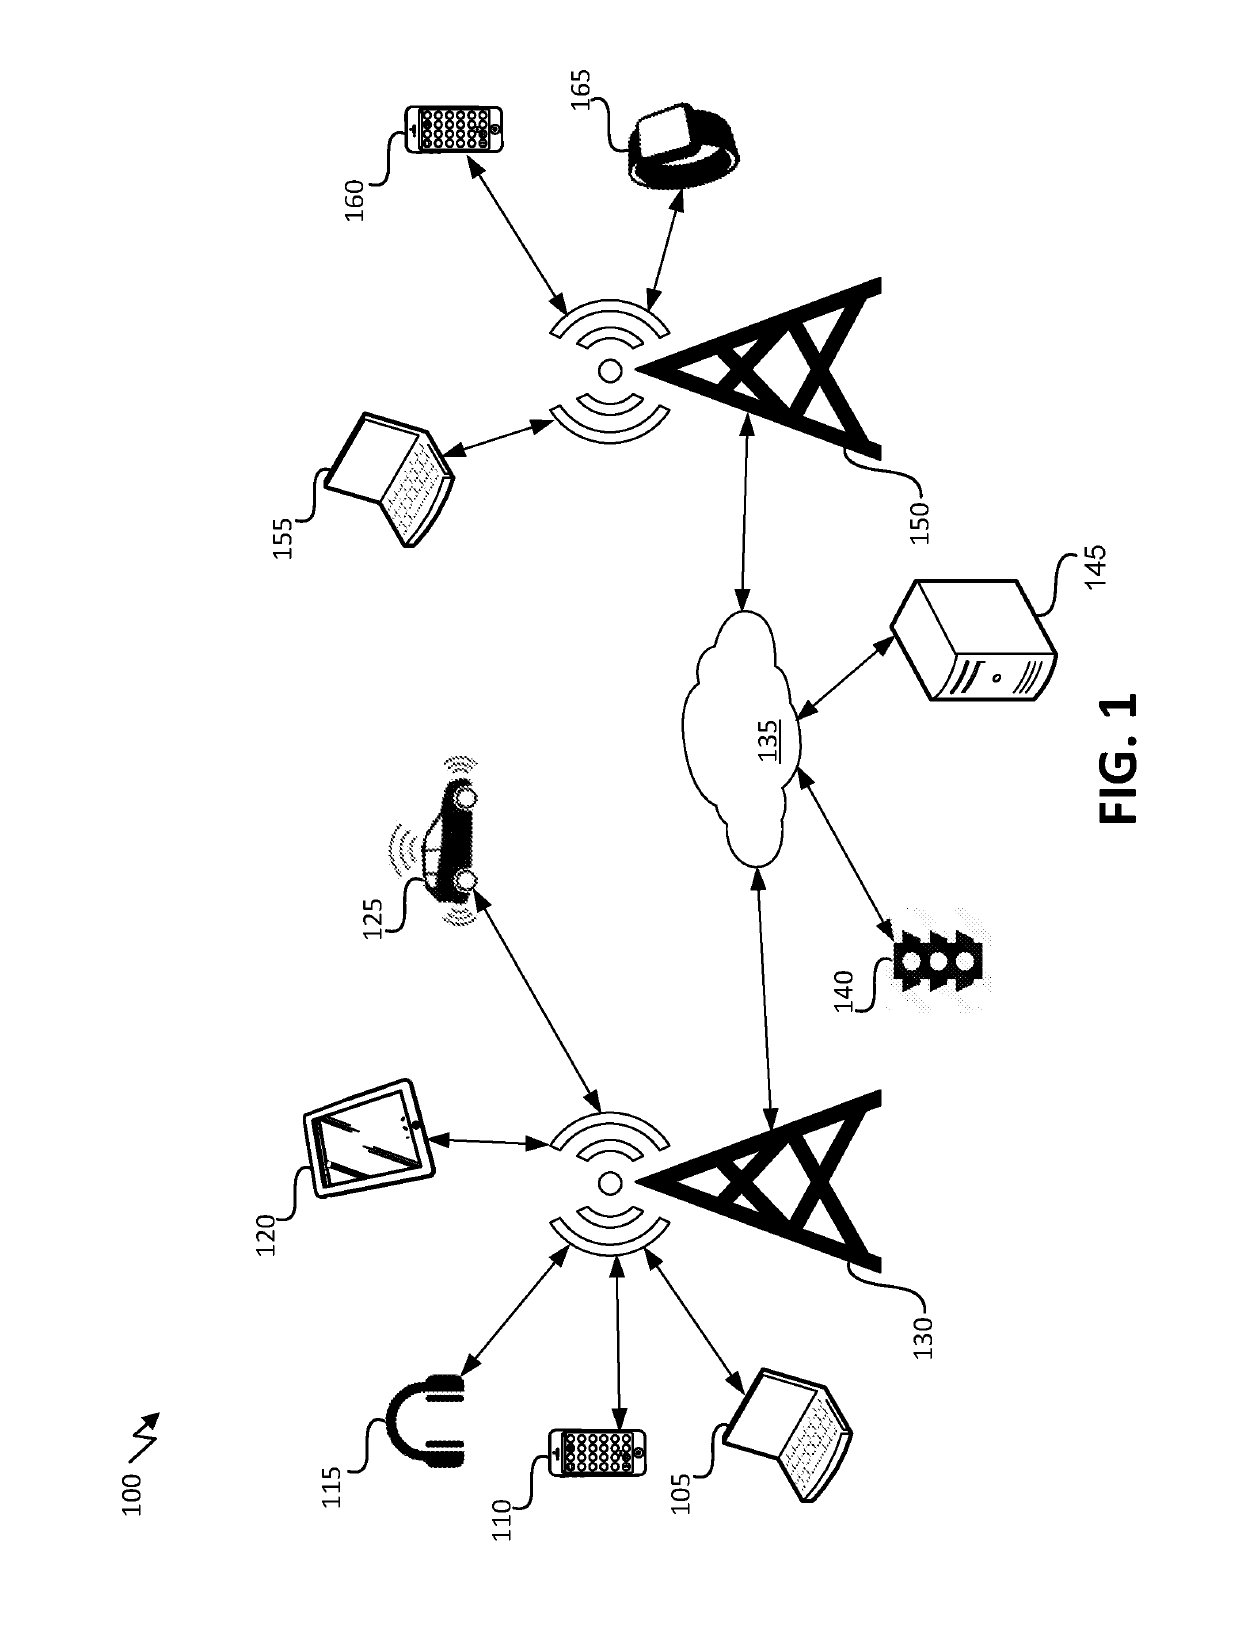 Systems and methods for identifying user density from network data